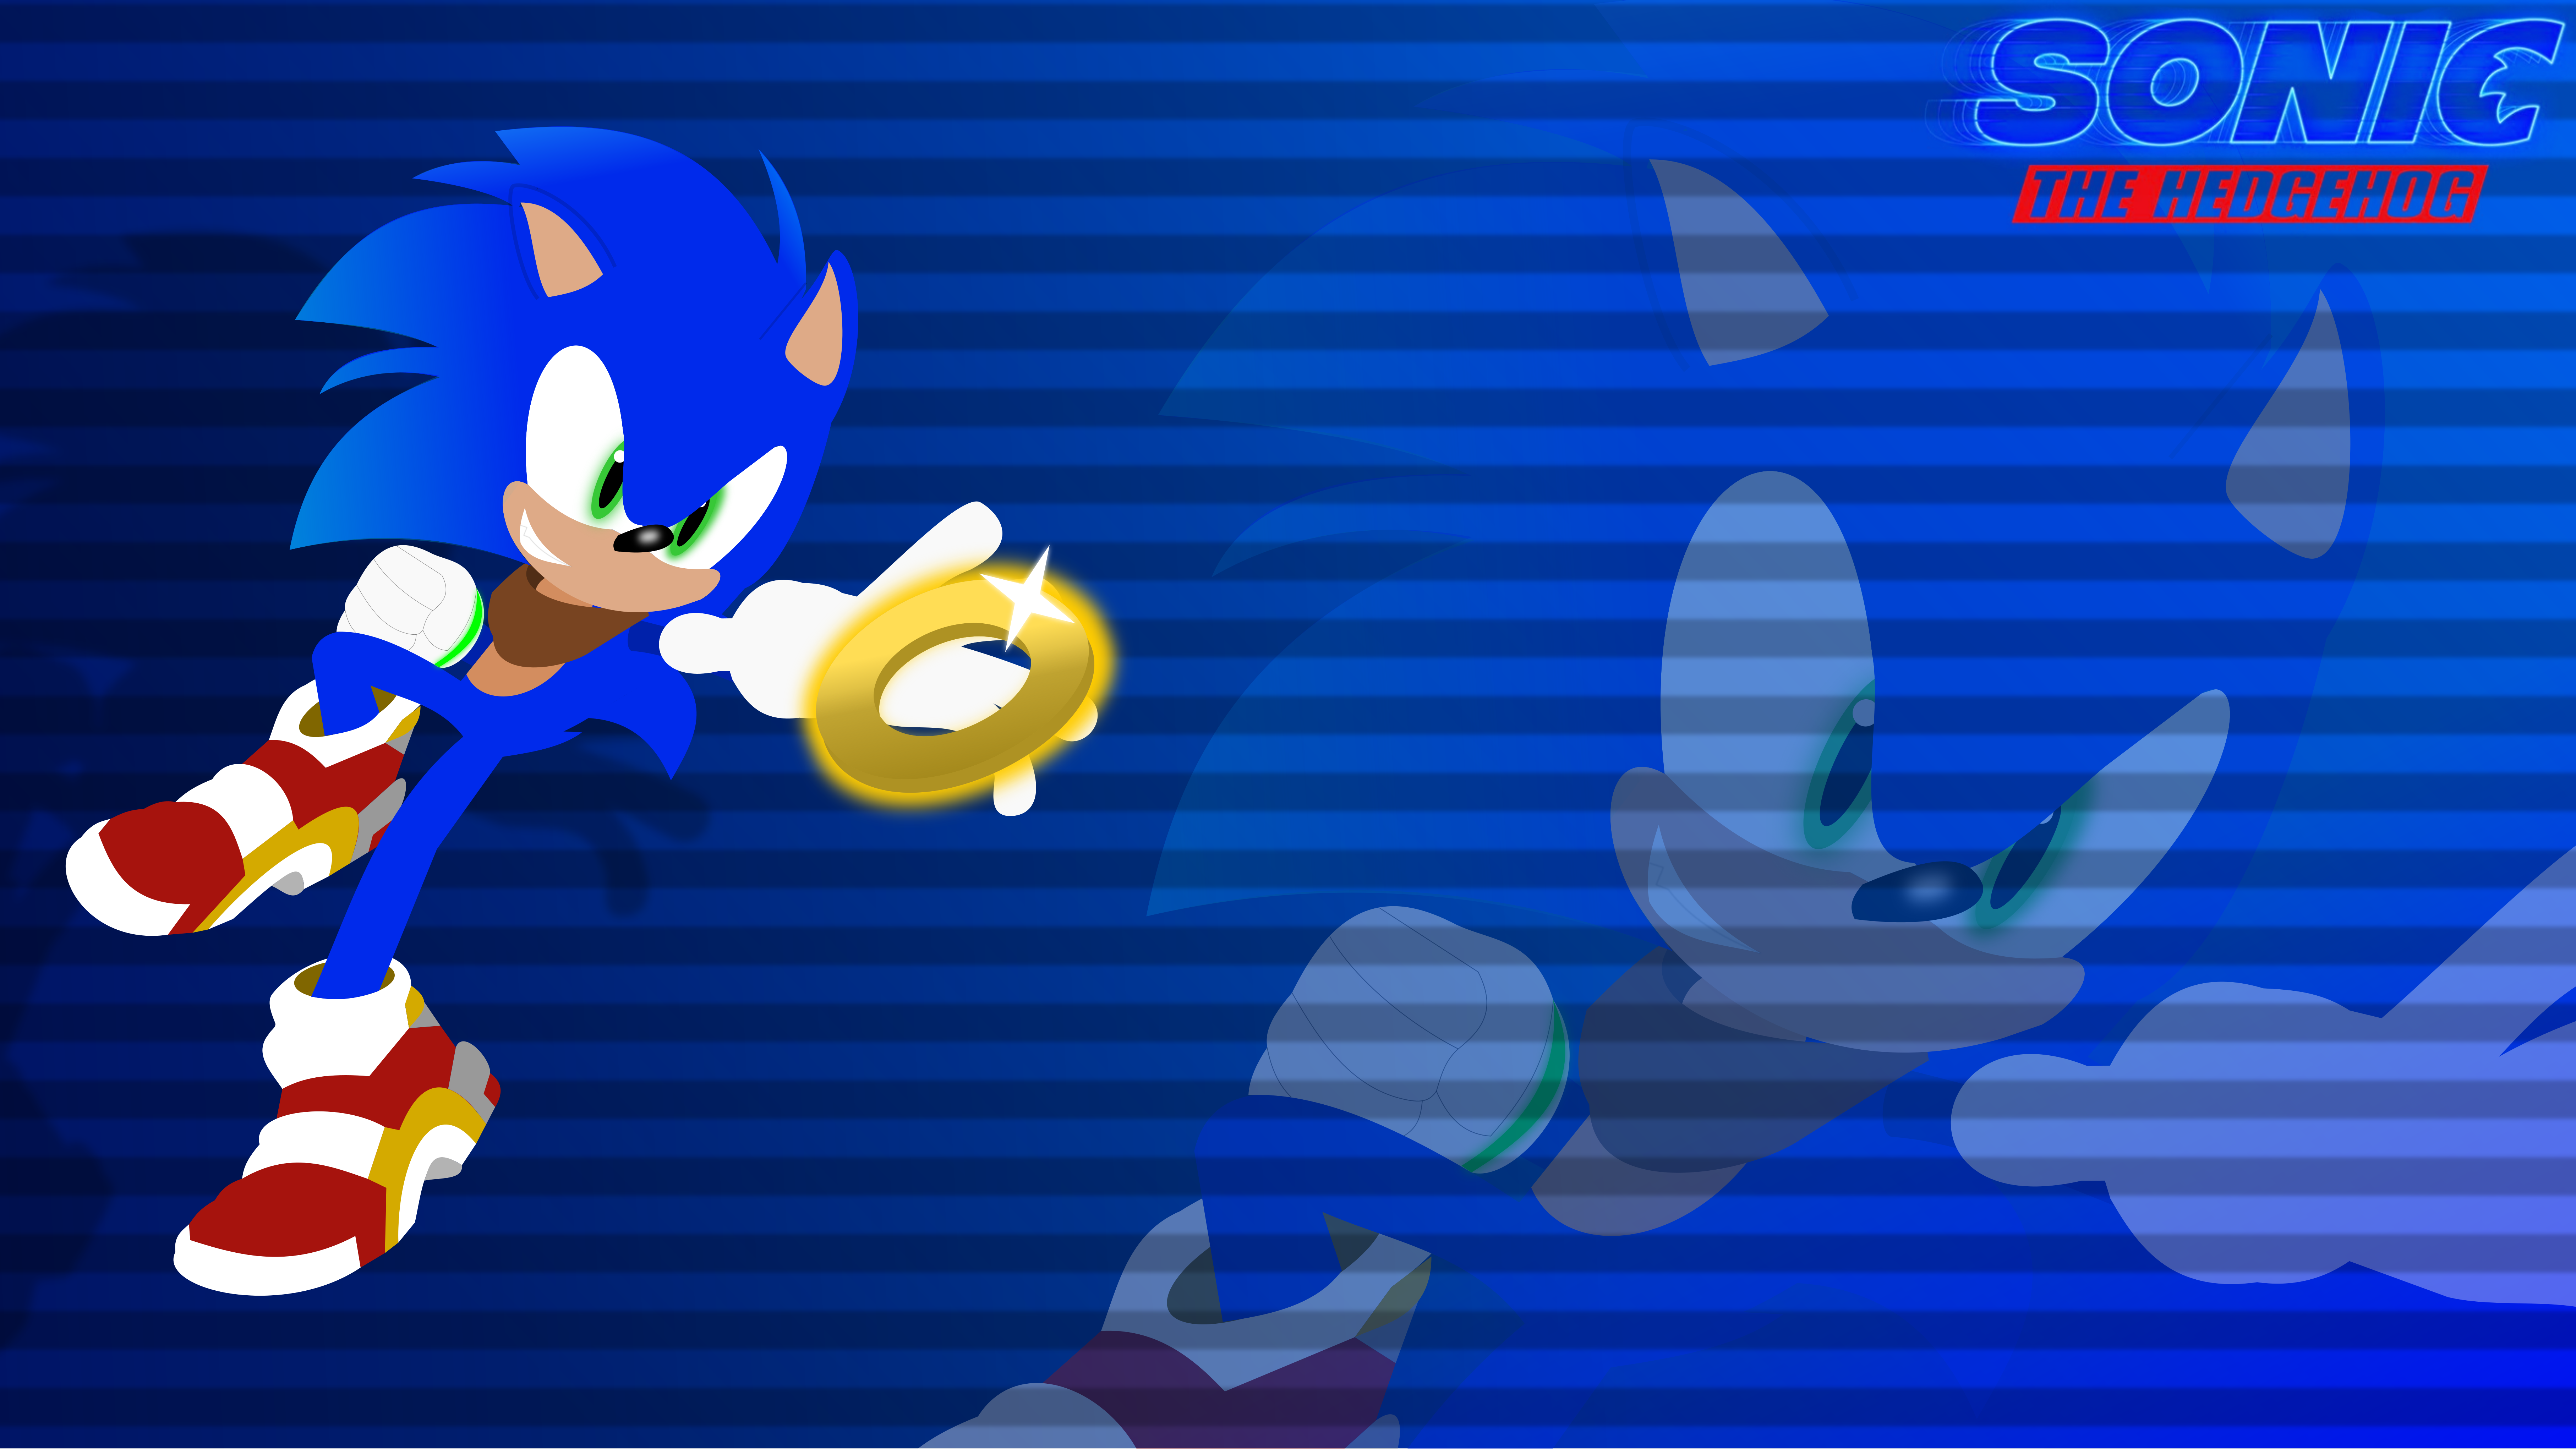 Team Sonic Wallpaper I decided to make